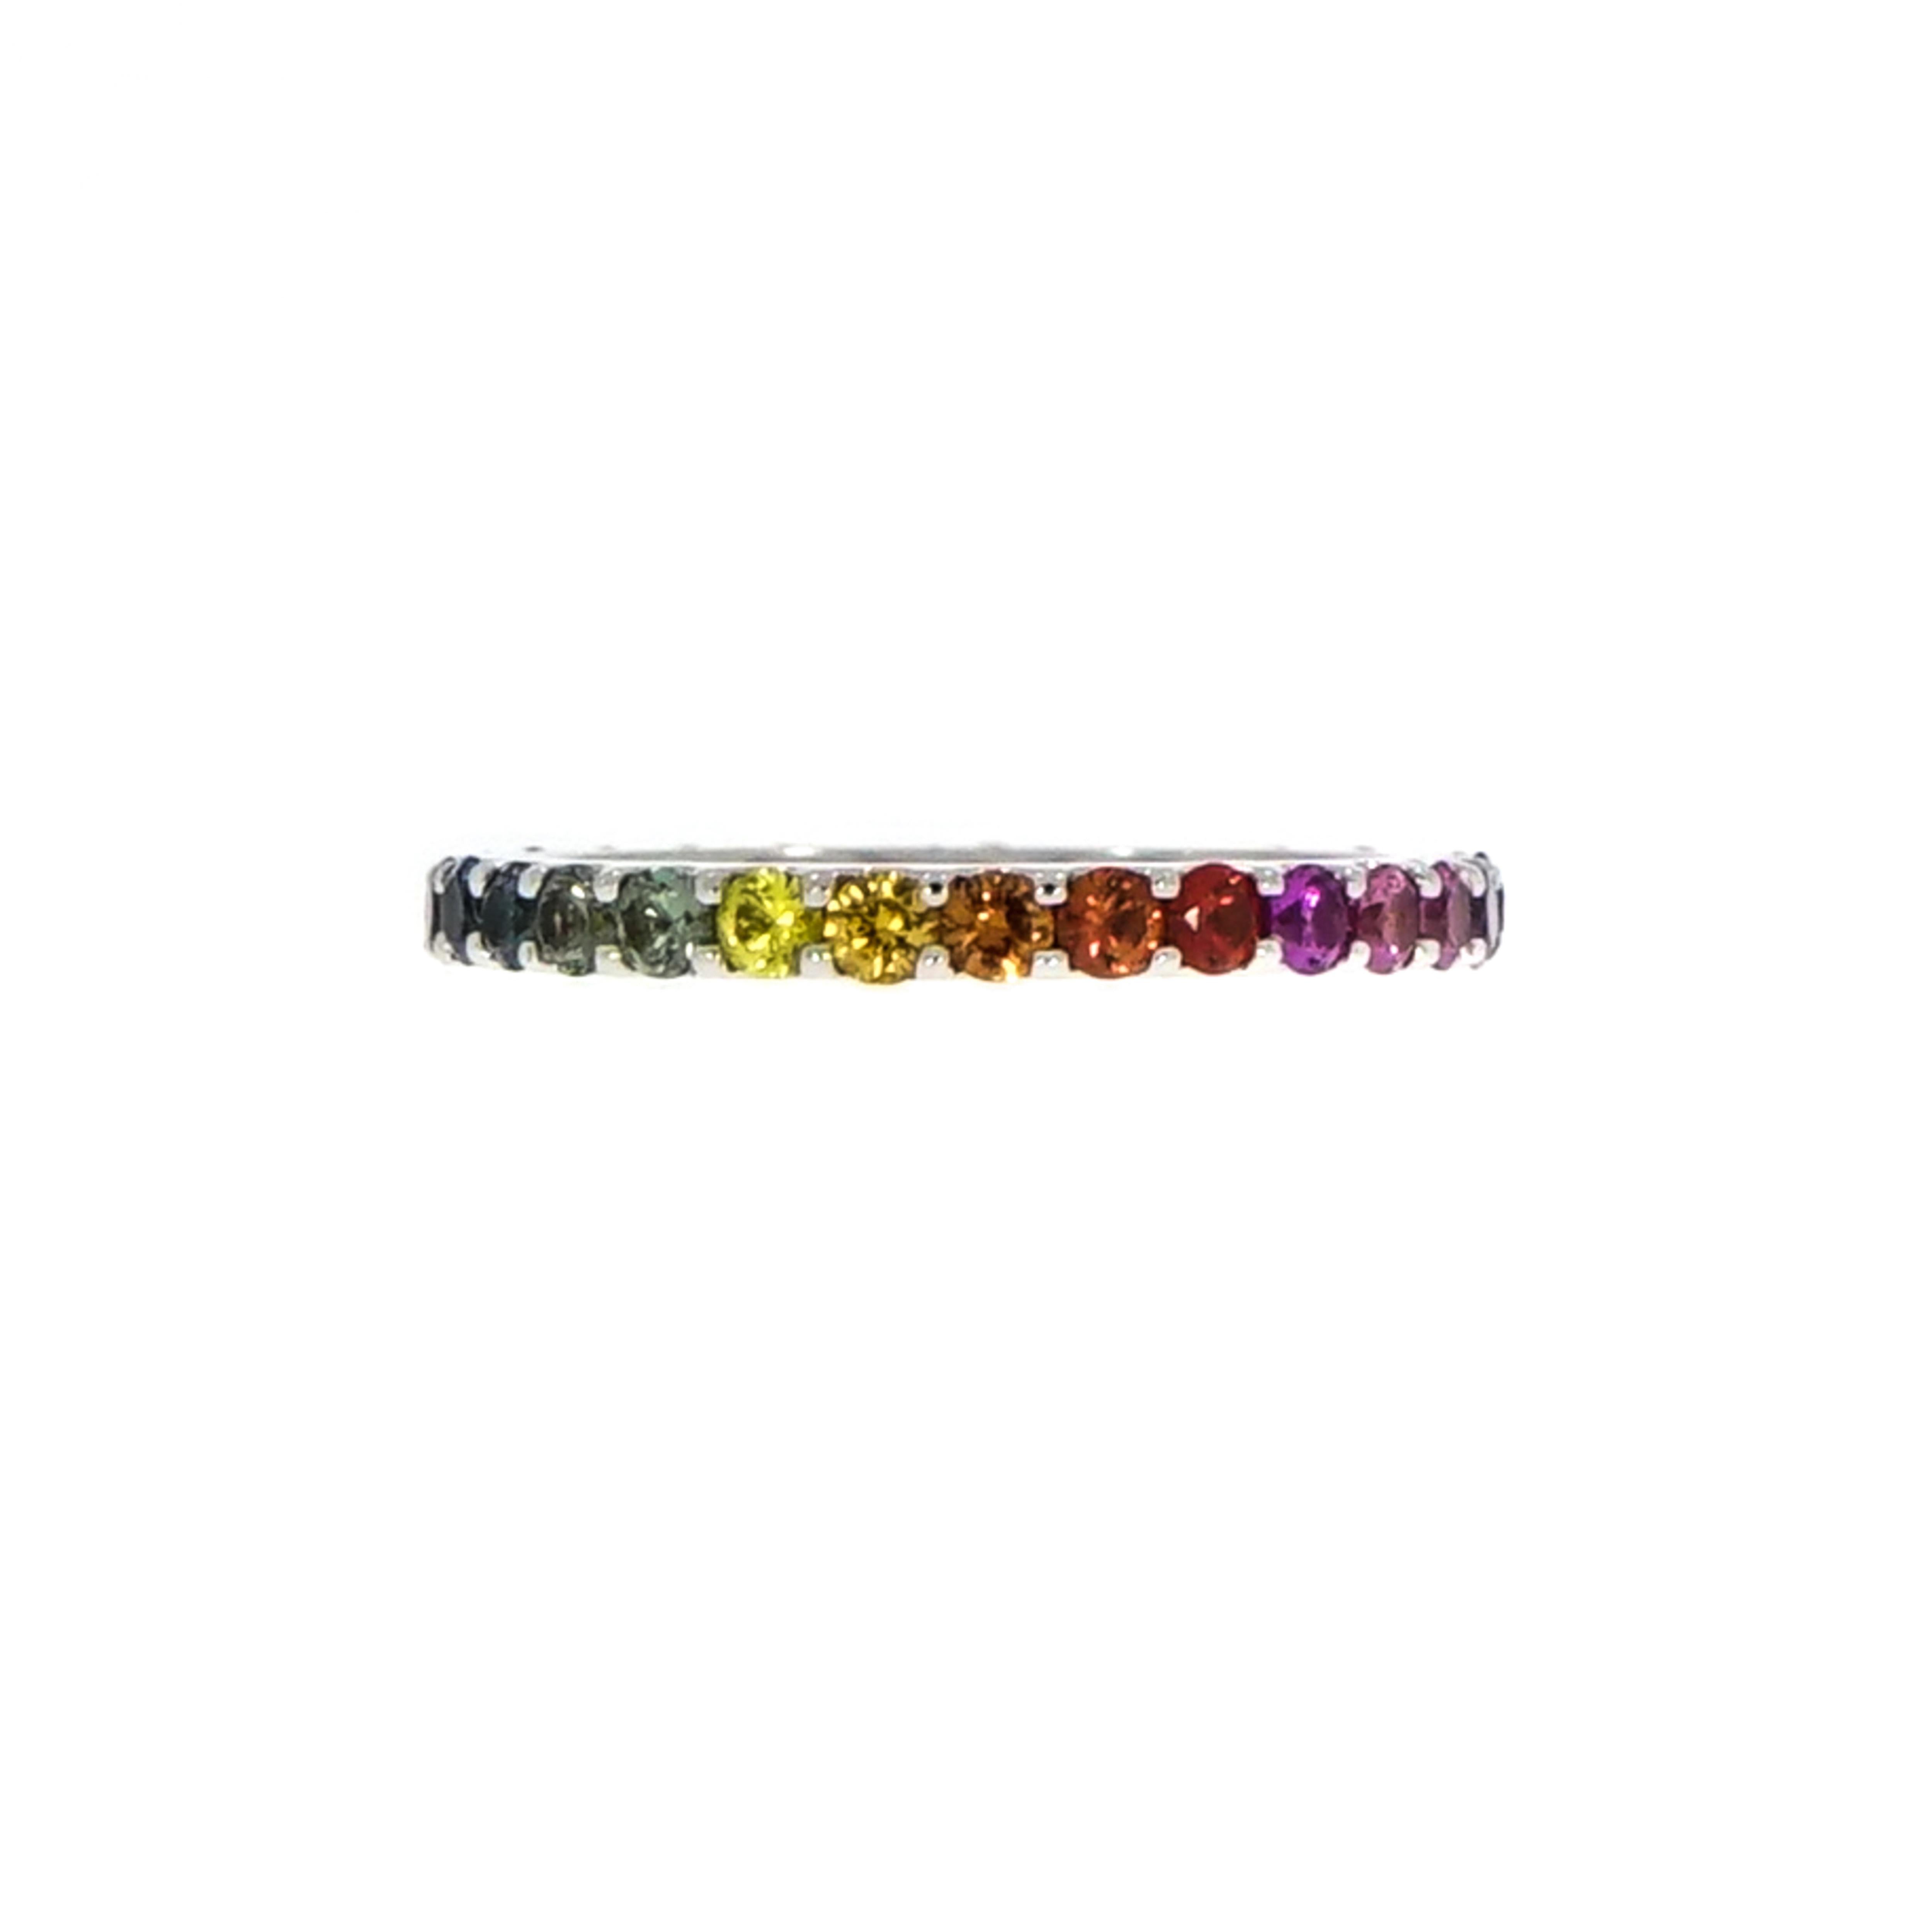 Modern, refined and sparkly with lots of colors!!! This feminine ring can be a timeless heirloom, showcasing natural colored sapphires in all spectrum of the rainbow. 
This handmade band consists of 29 round sapphires perfectly french set in 18k